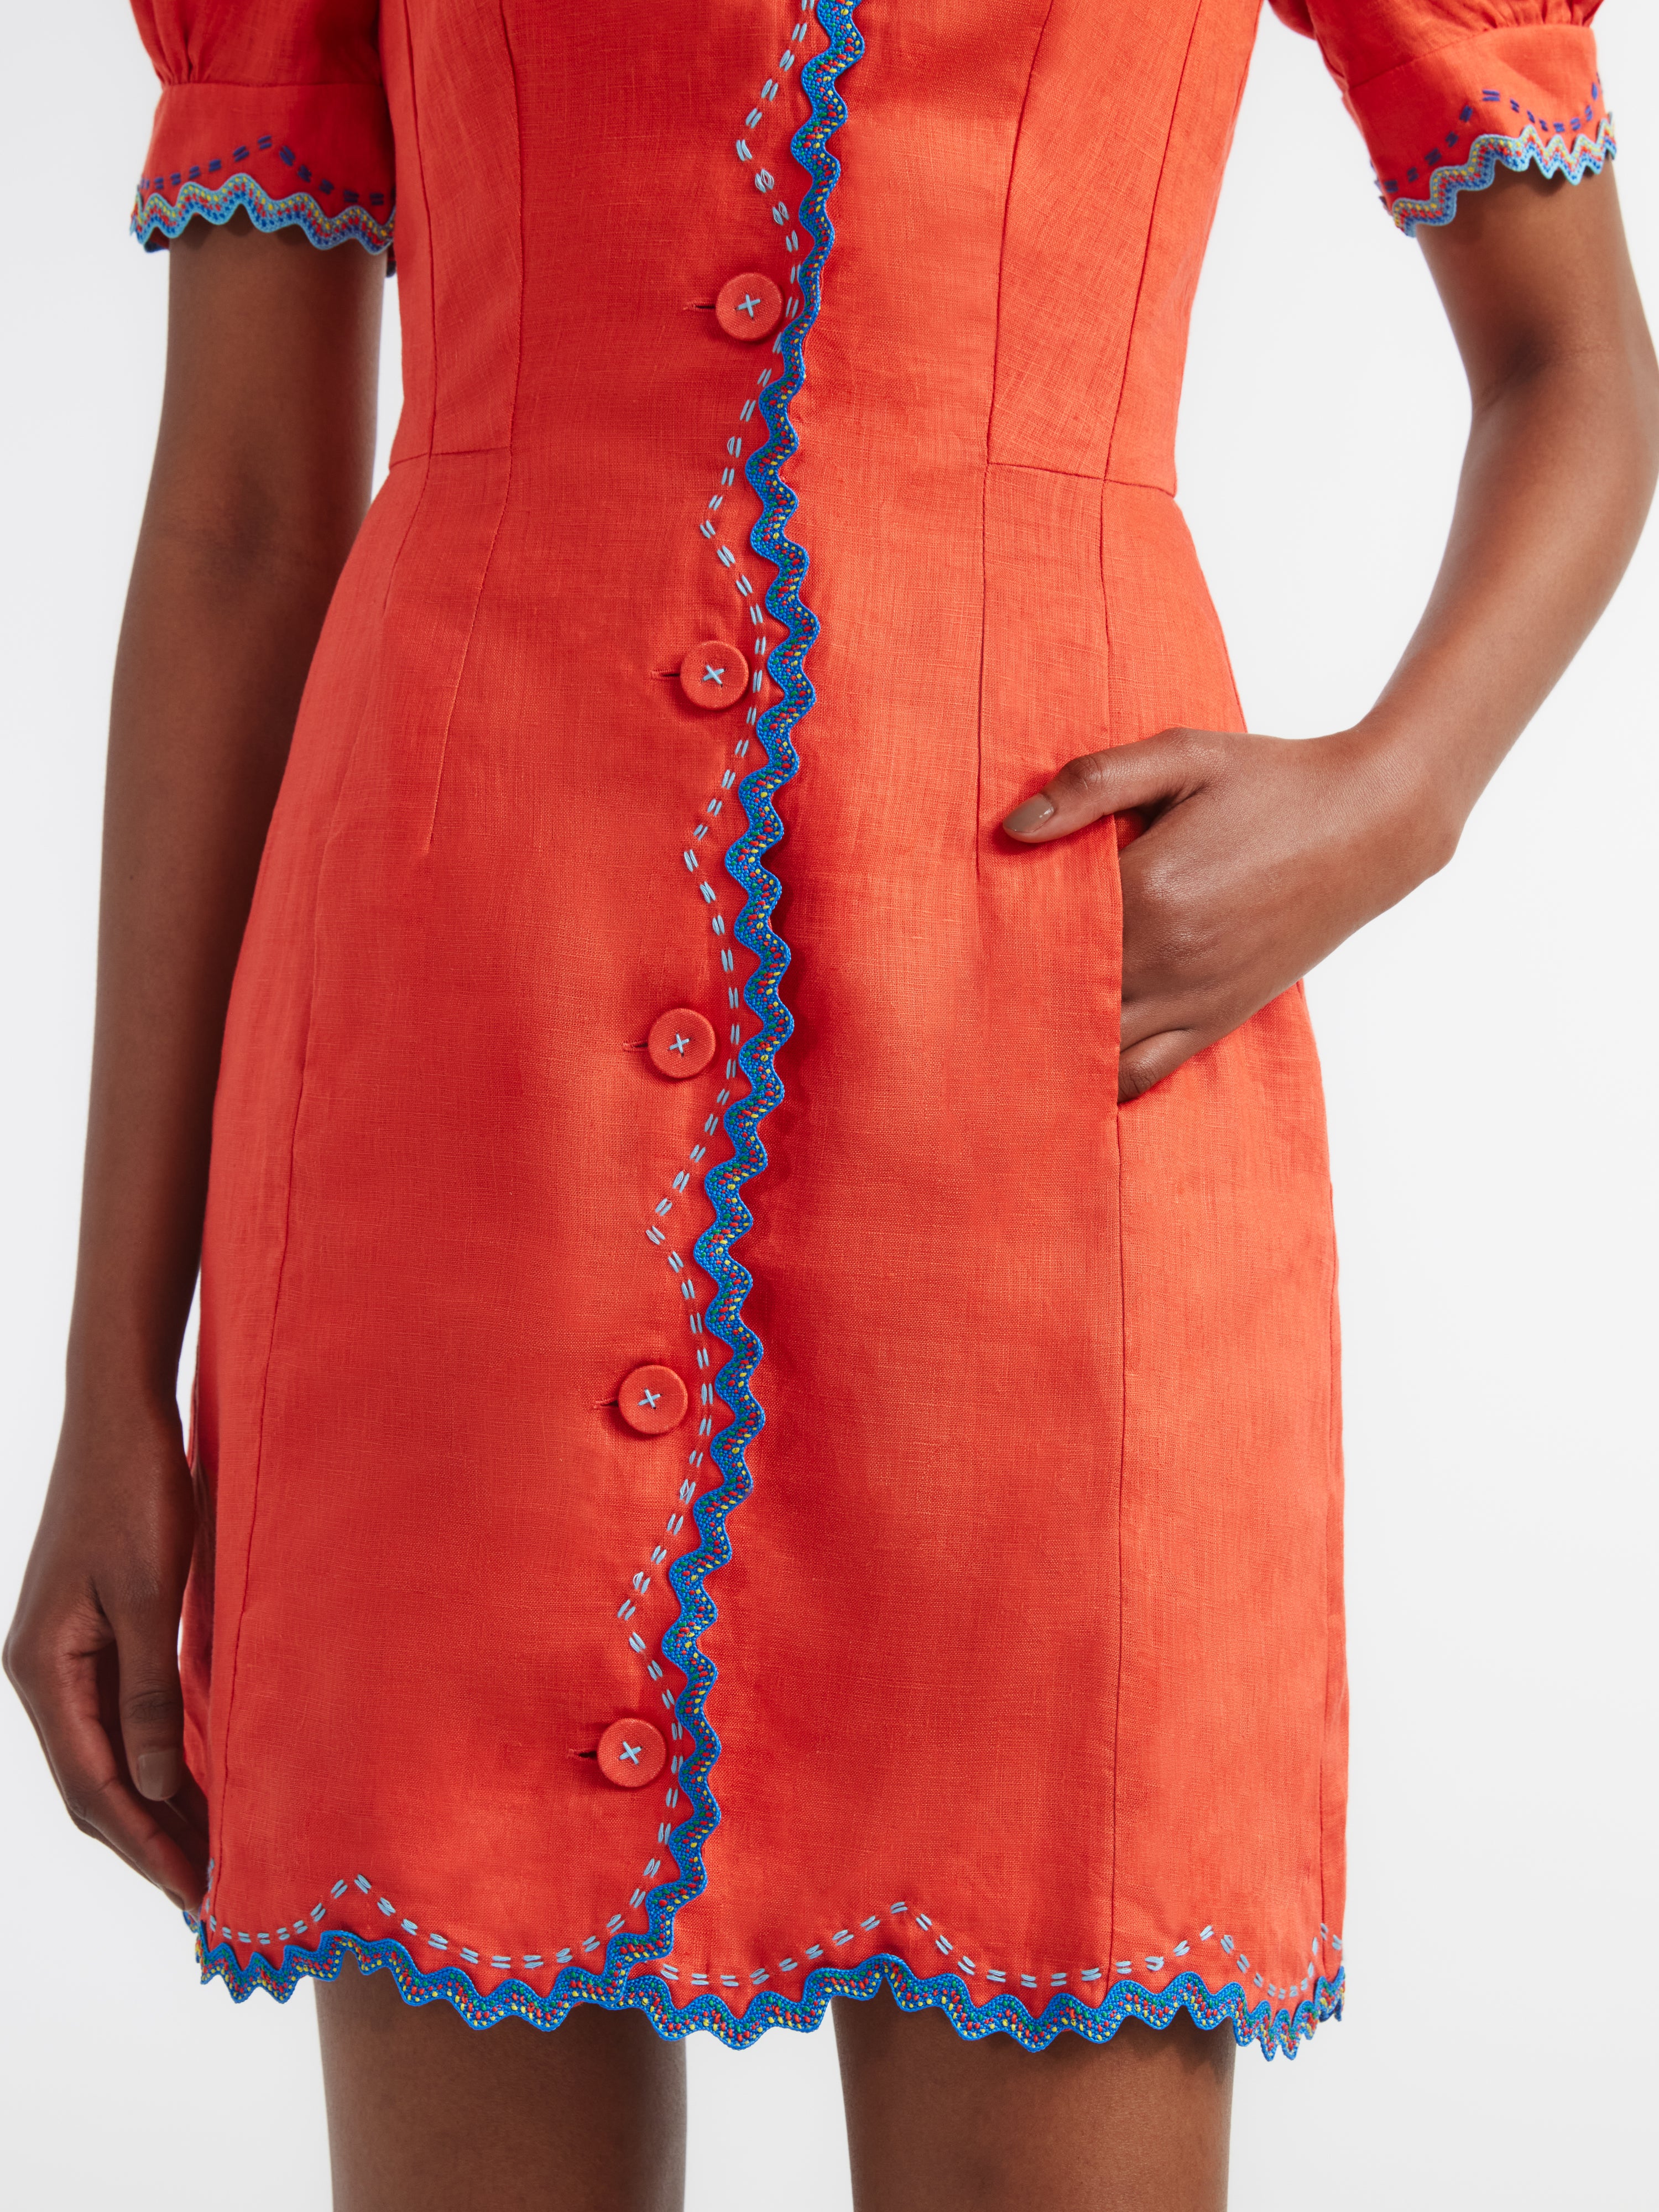 Marlee Dress in Coral with Stitch Embroidery